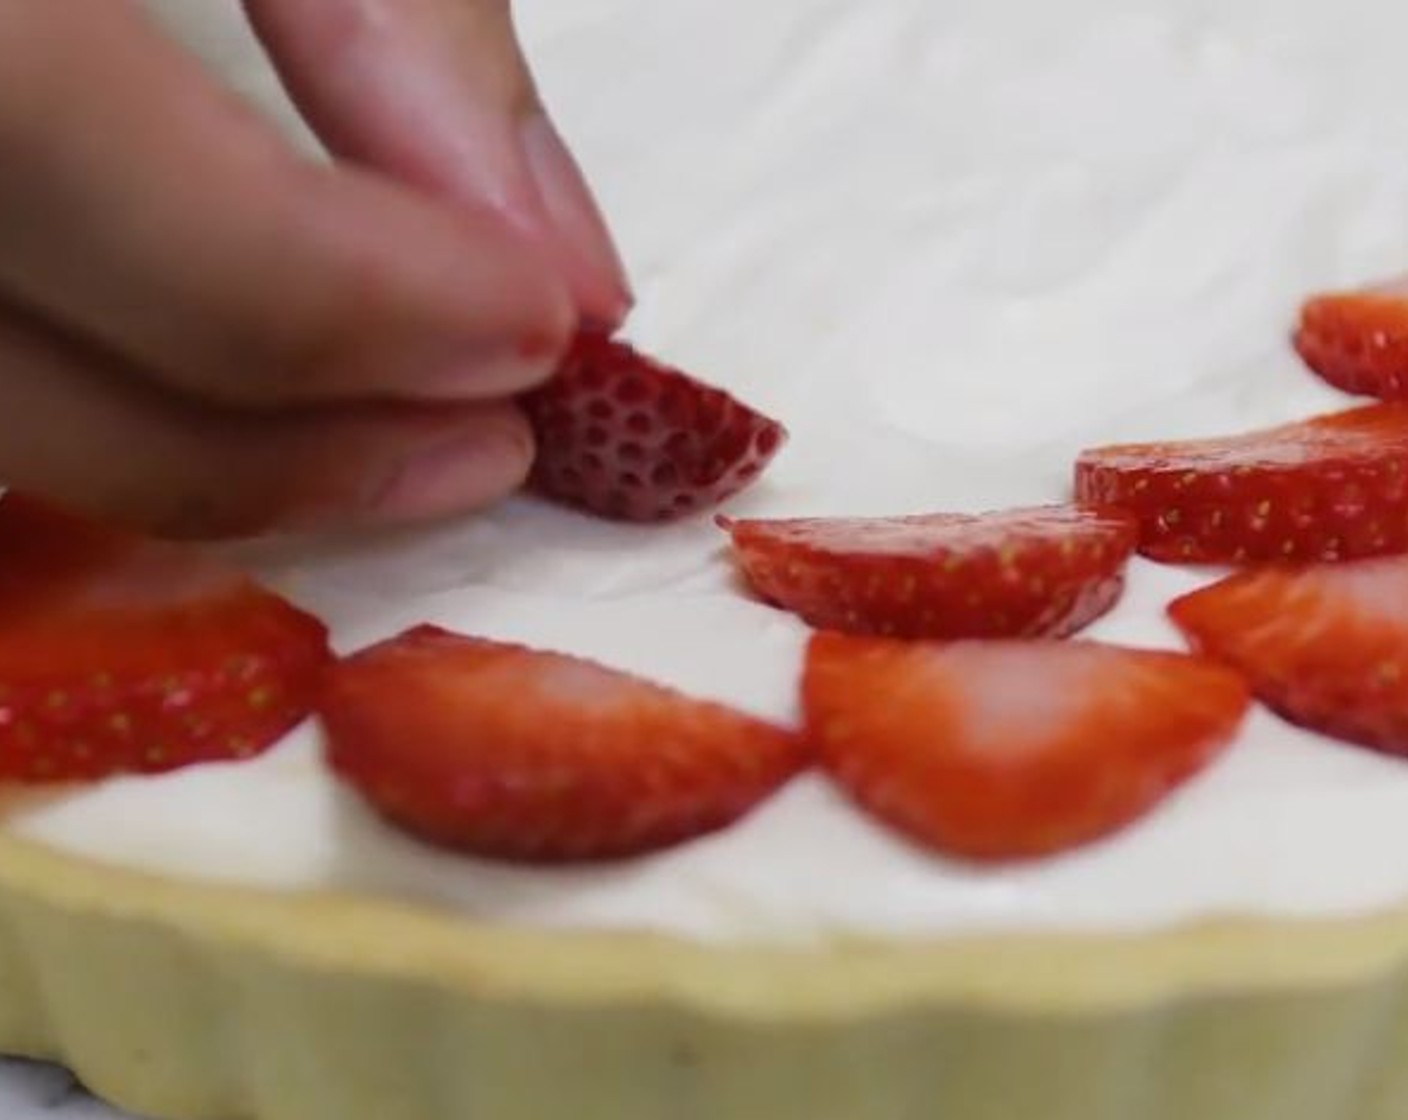 step 8 Add cheesecake filling to cooled crust and spread evenly. Top with sliced strawberry. Refrigerate until ready to serve. The more time it has in the fridge, the better it tastes.